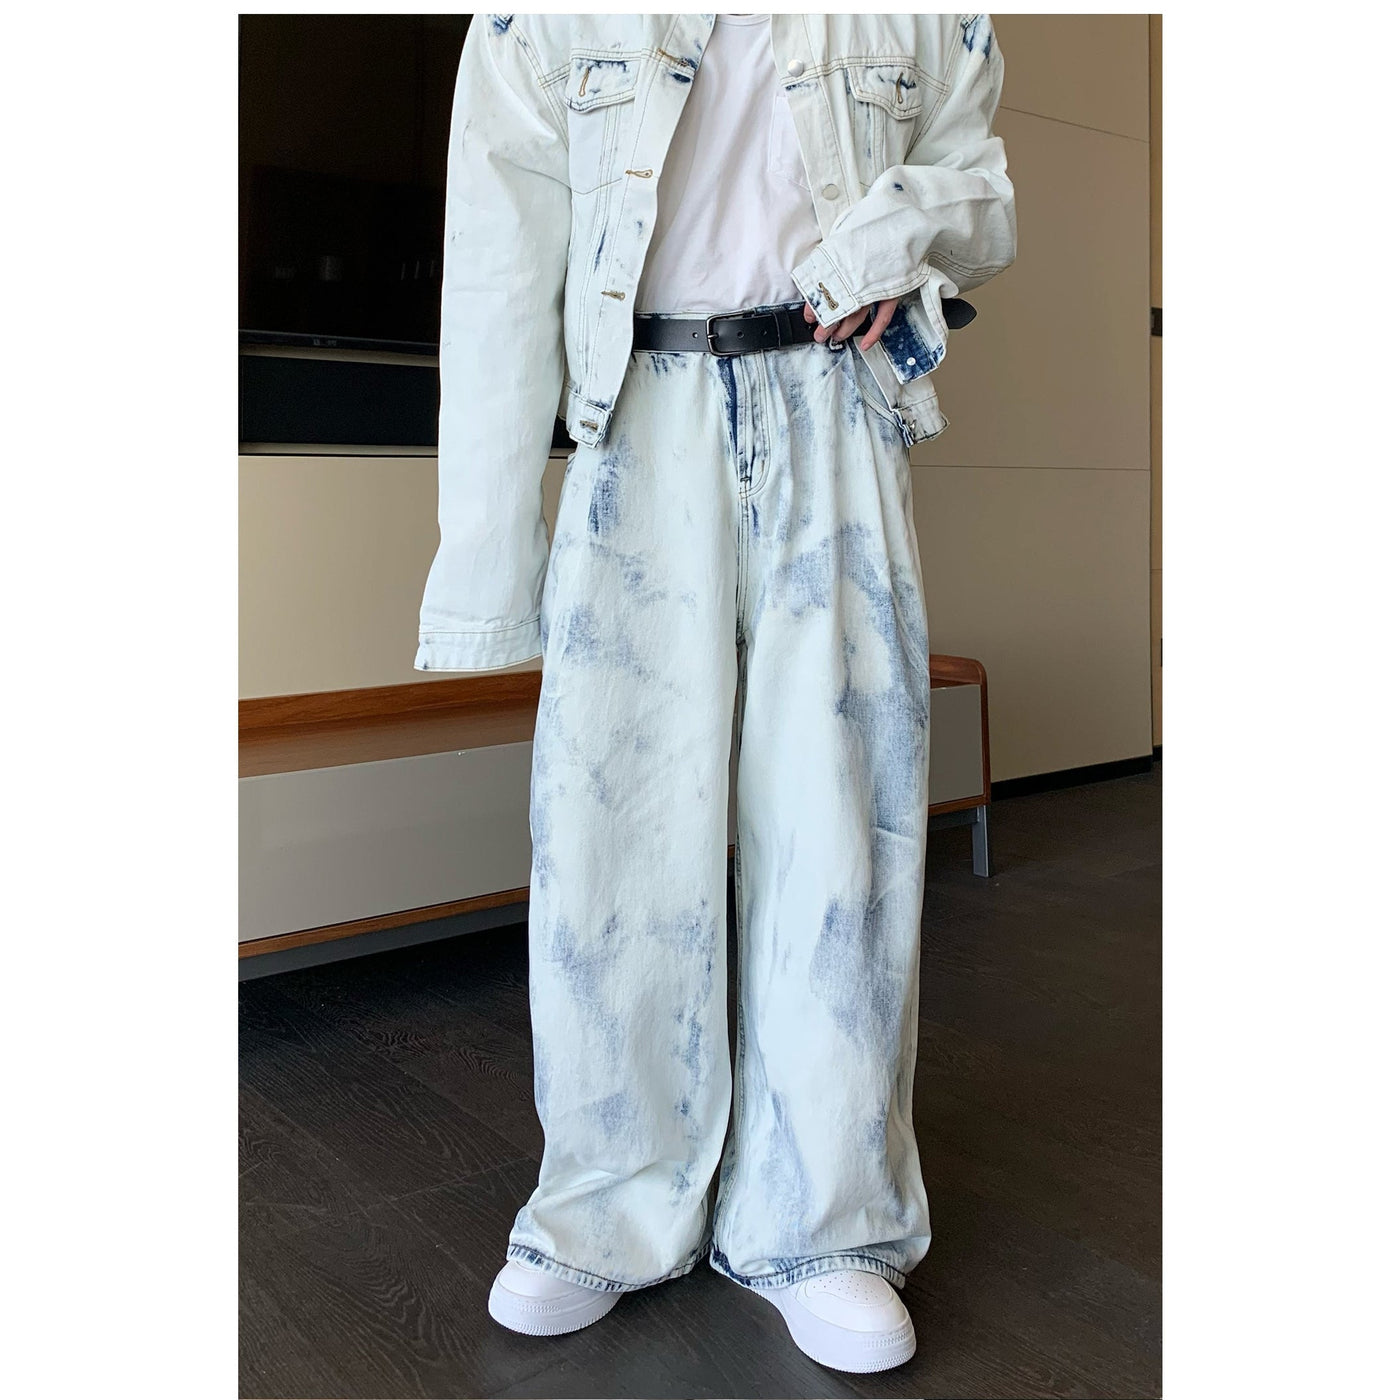 Blue jean jumpsuit and trench coat relax with sneakers | Blue jean  jumpsuit, Jeans jumpsuit, Jean